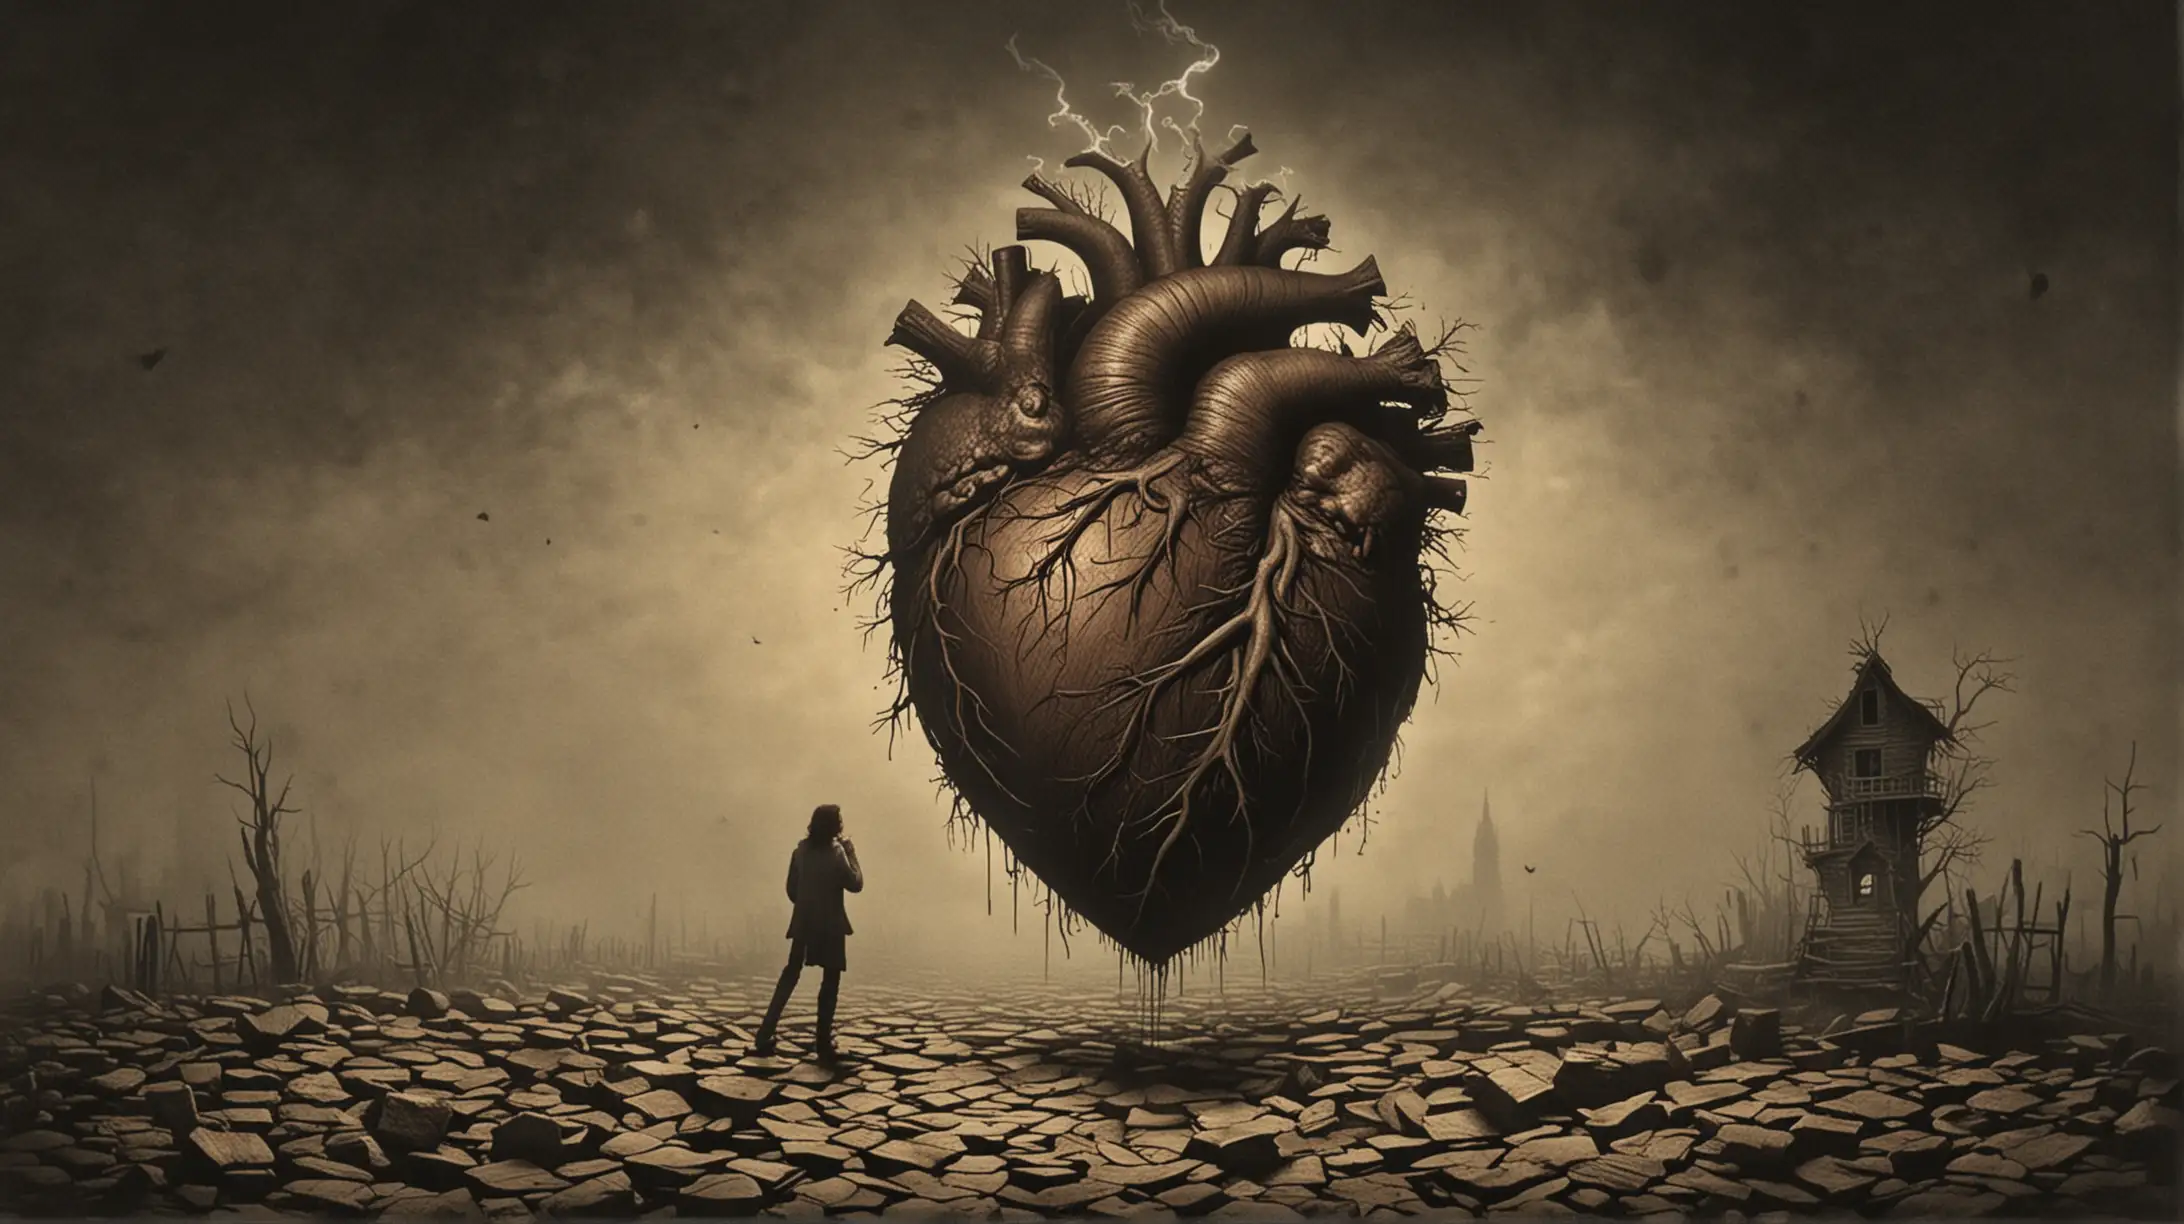 Eerie Scene from The TellTale Heart Depicting Tension and Dread